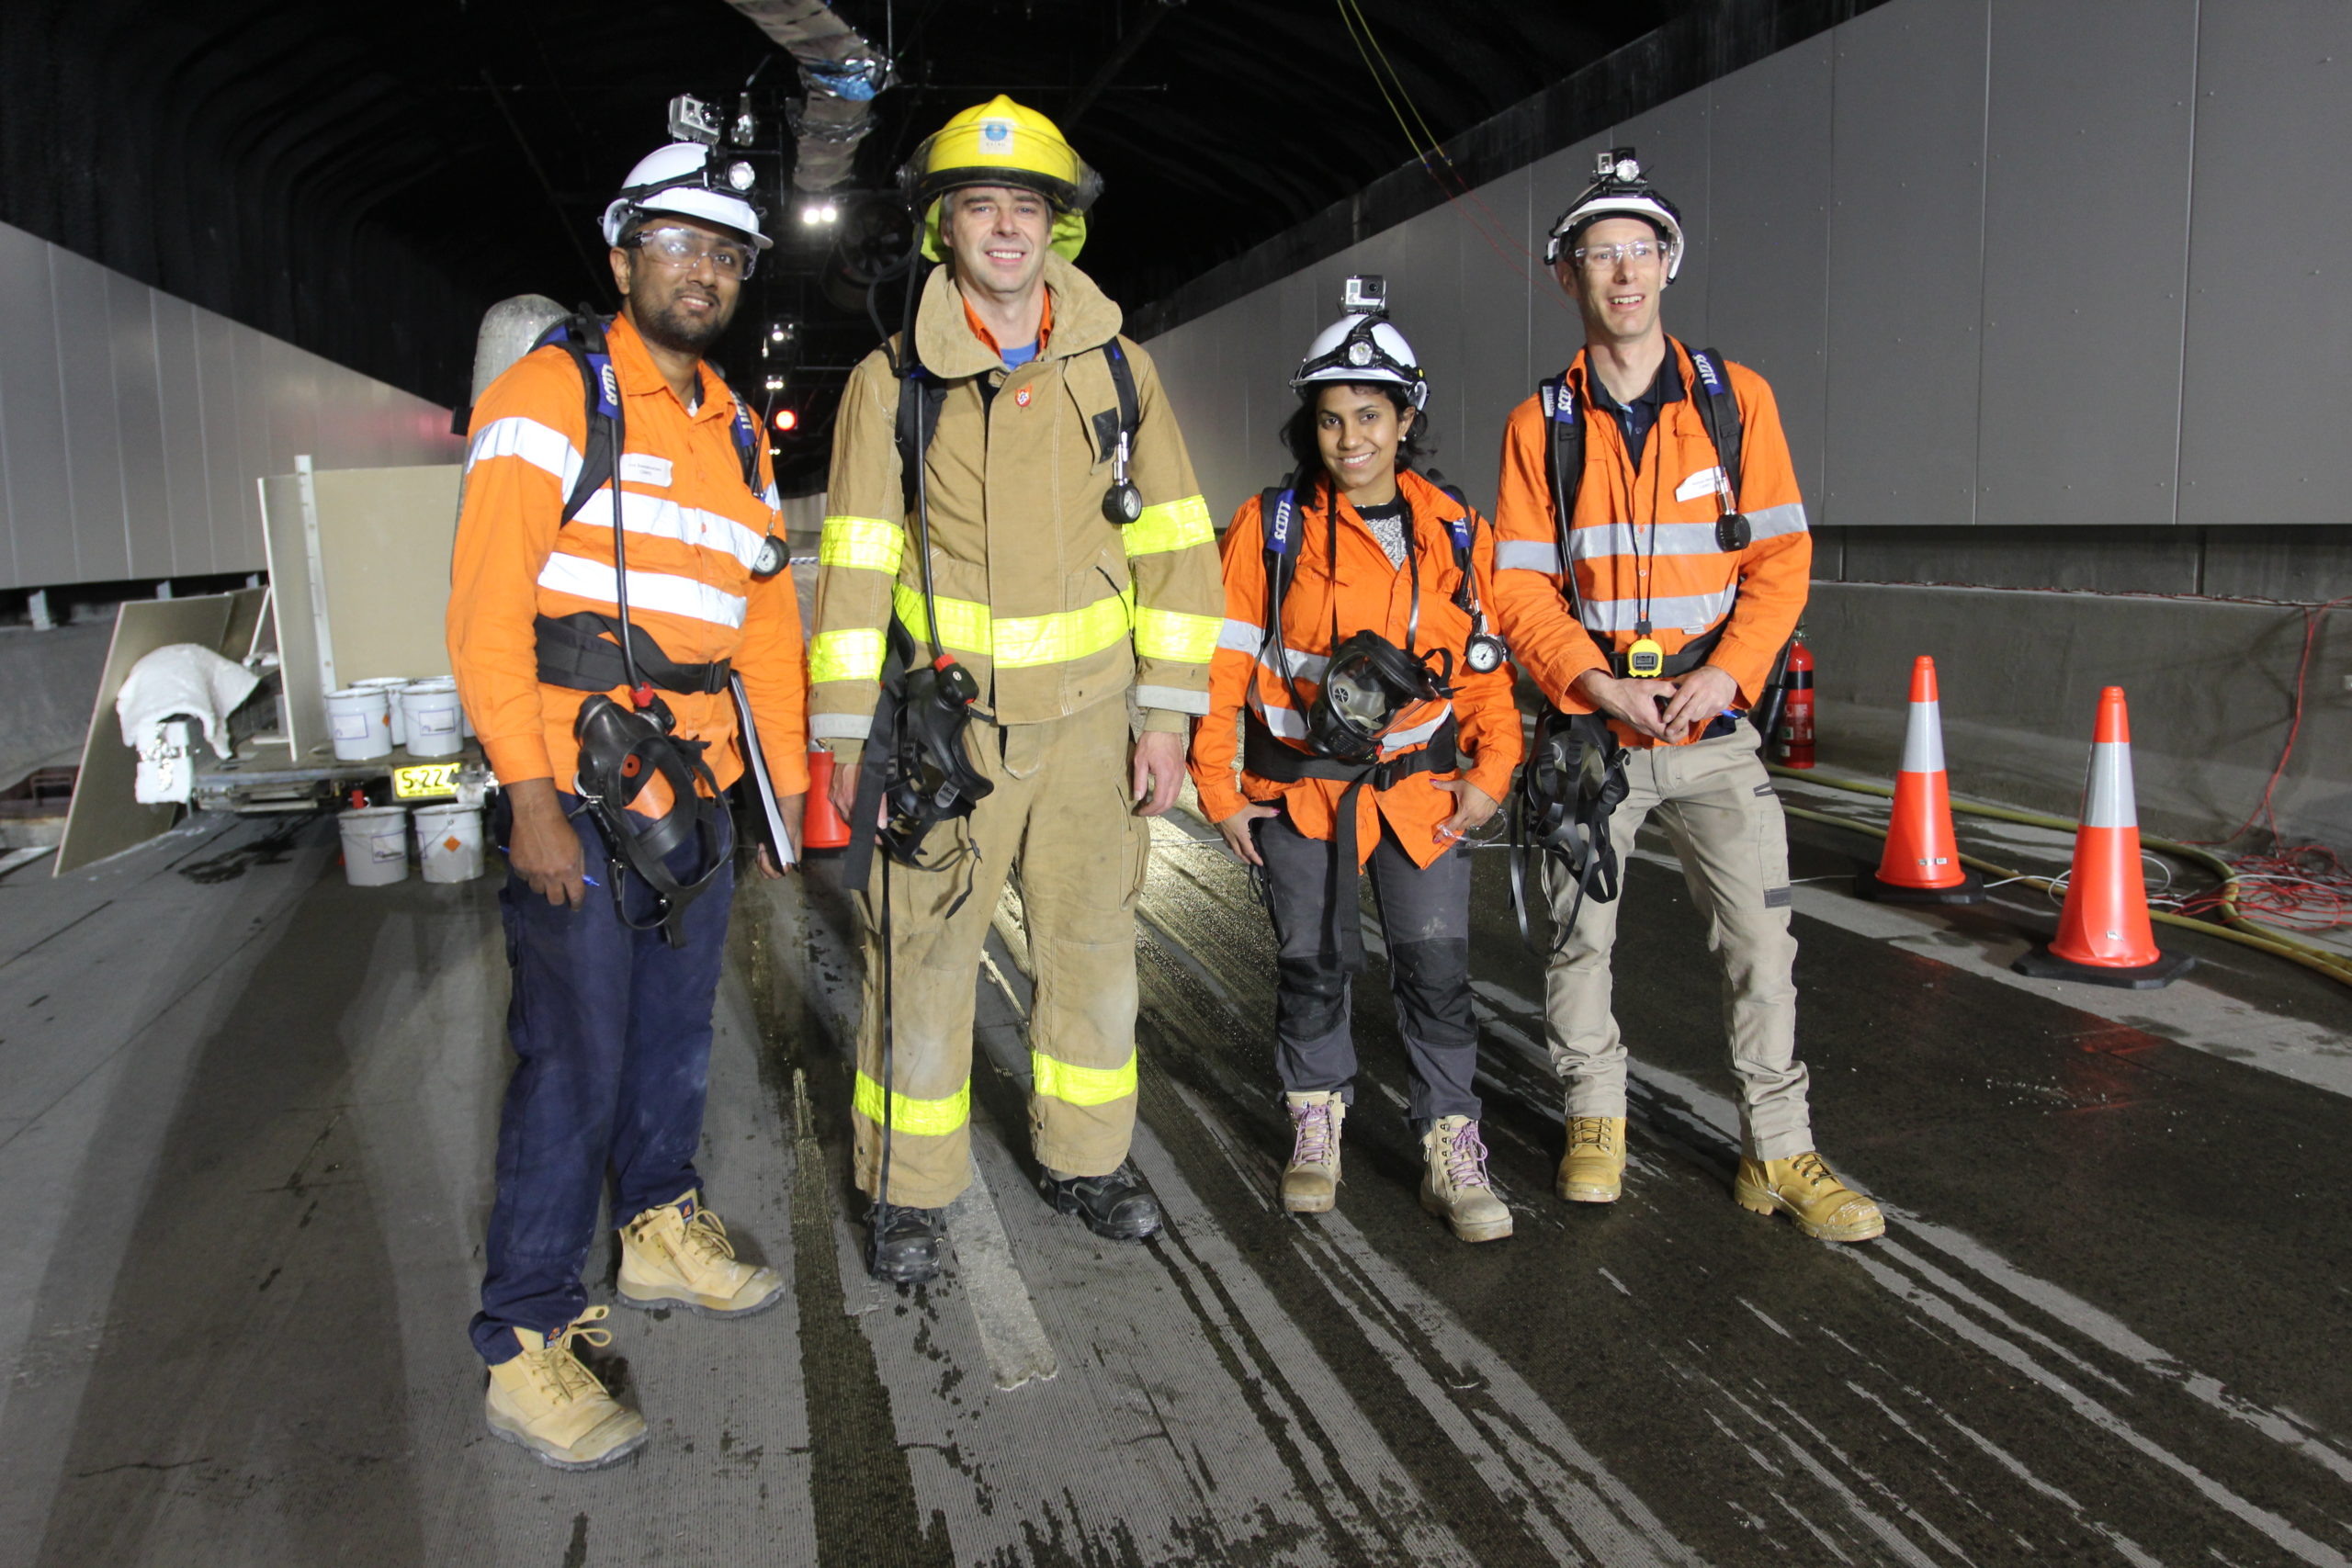 Tunnel safety. Image of a team of four testing safety equipment in a tunnel.